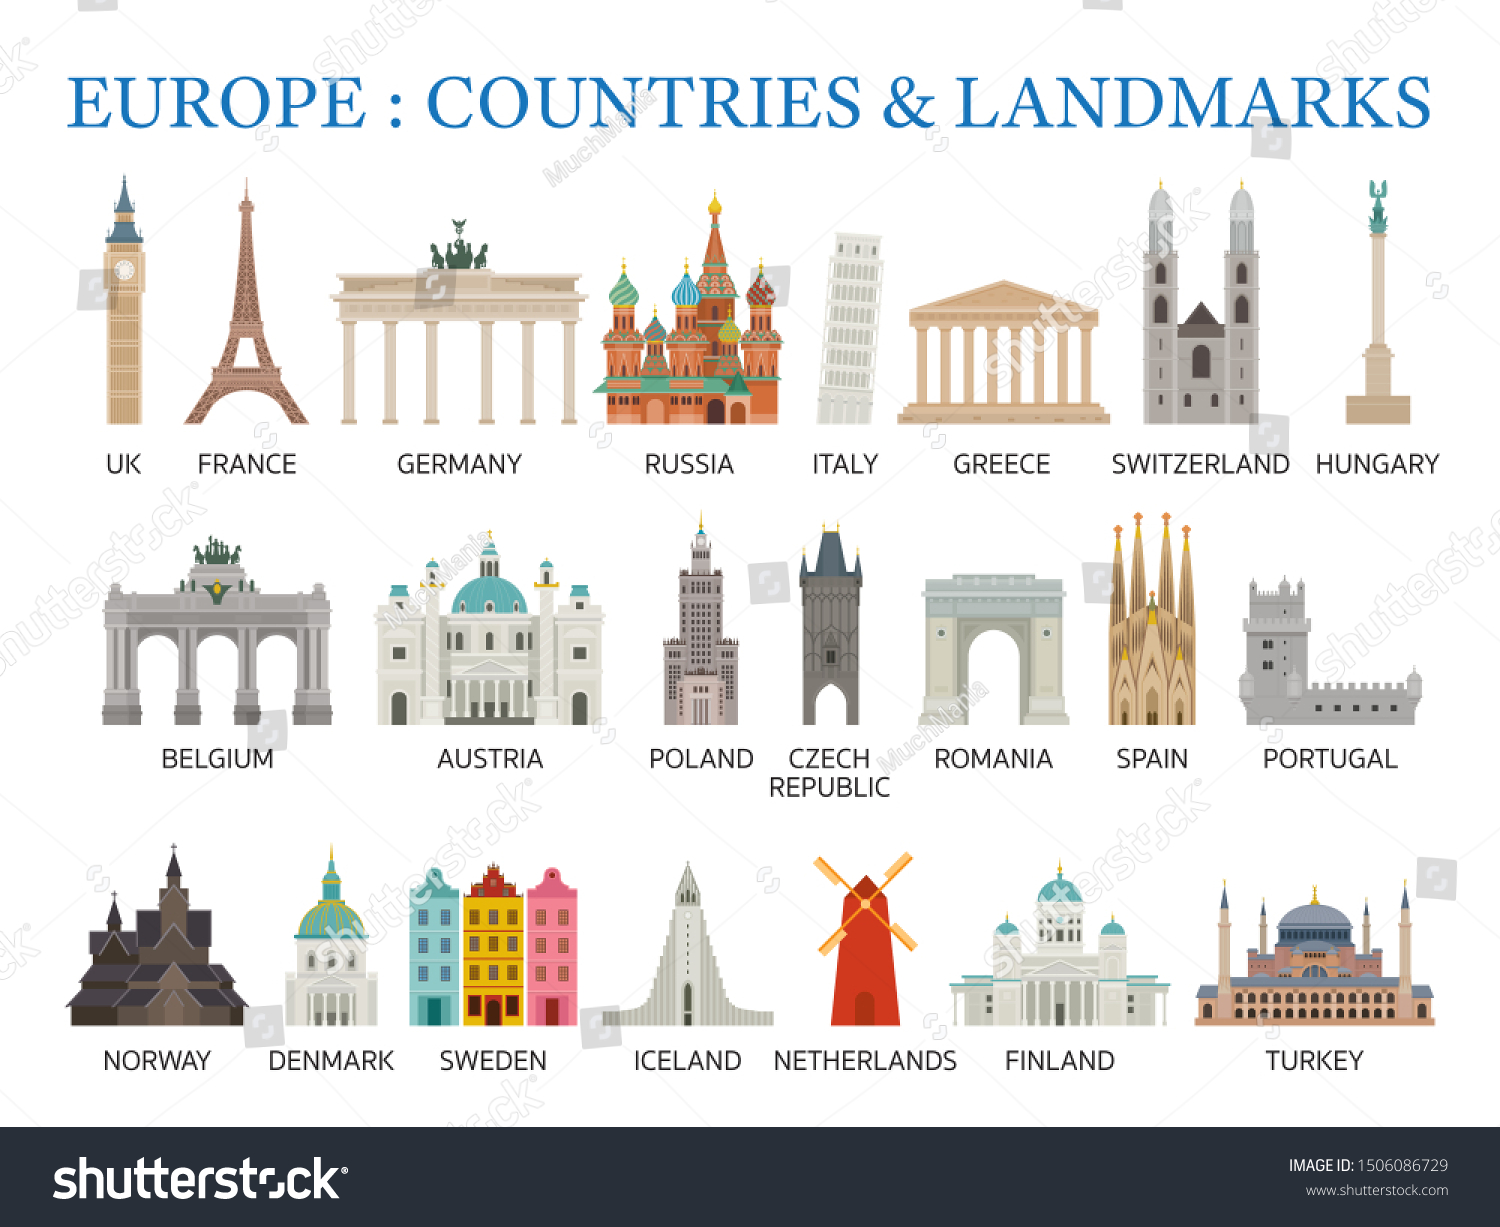 Europe Countries Landmarks in Flat Style, Famous Place and Historical Buildings, Travel and Tourist Attraction #1506086729